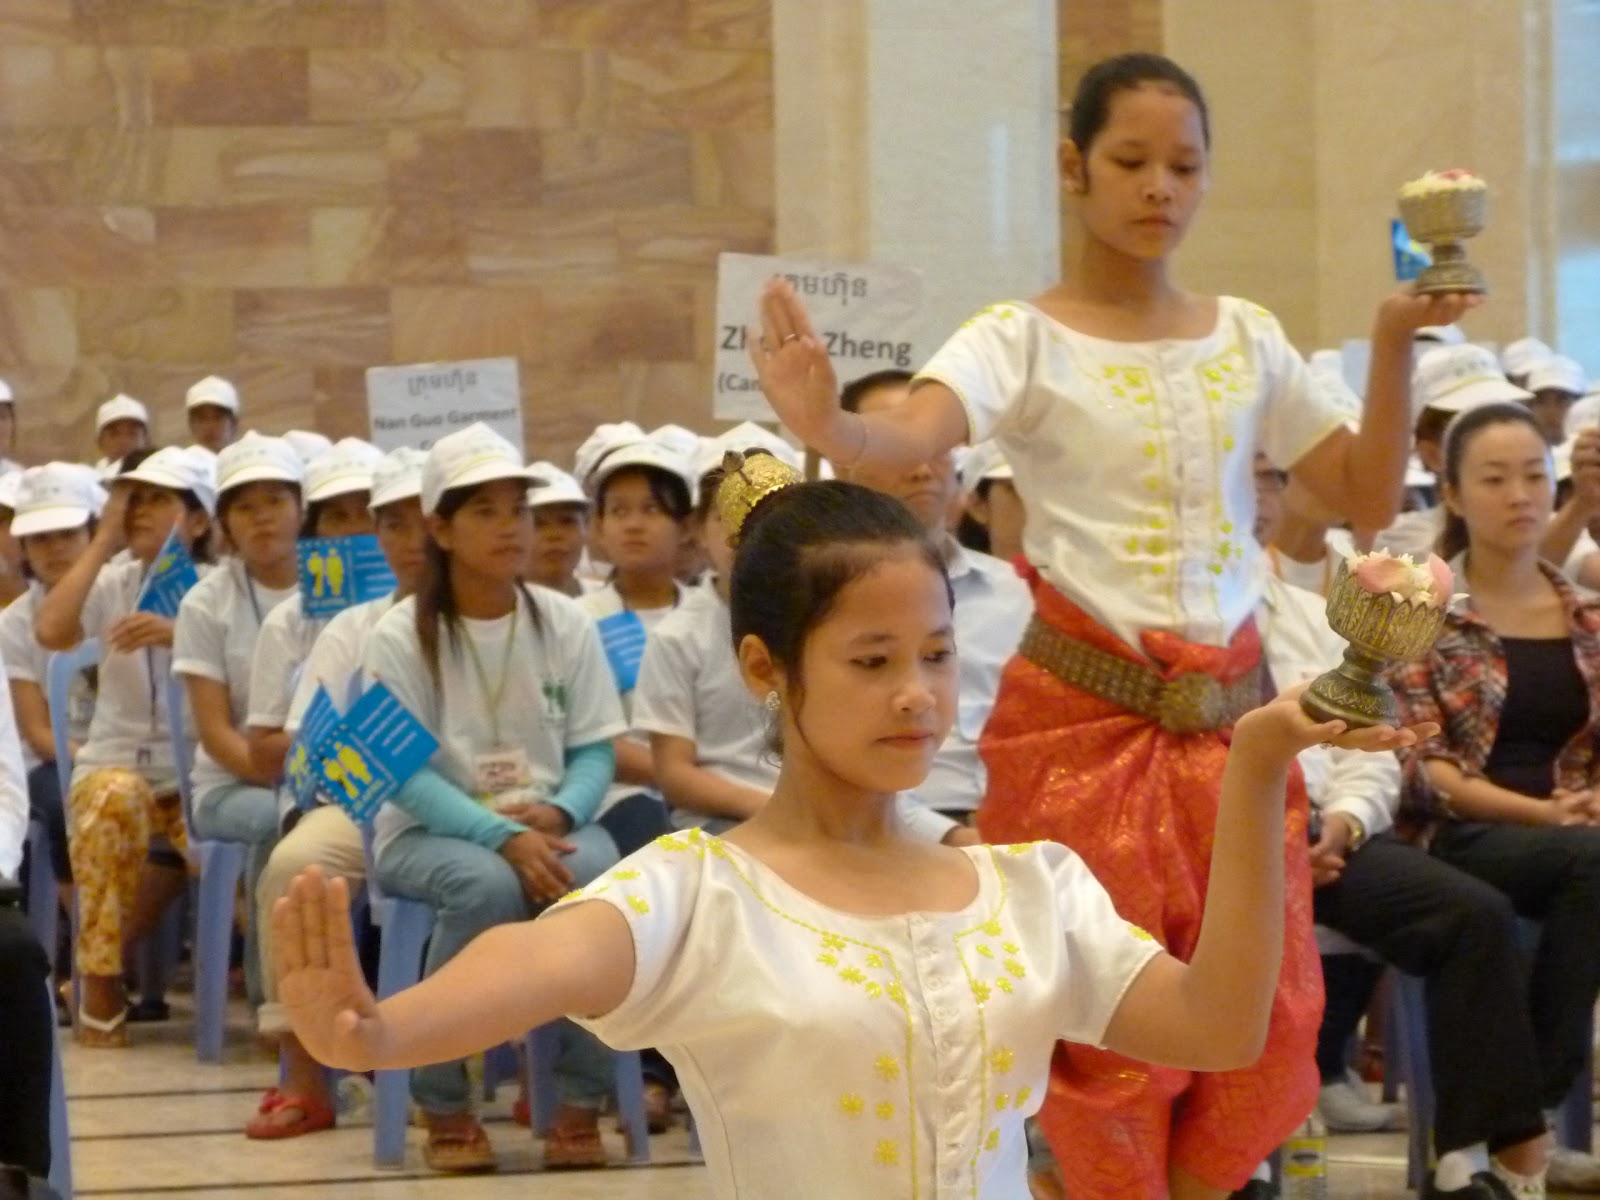 Nokor Khmer: OSH Day: More than 1,500 People Die Annually in Cambodia ...